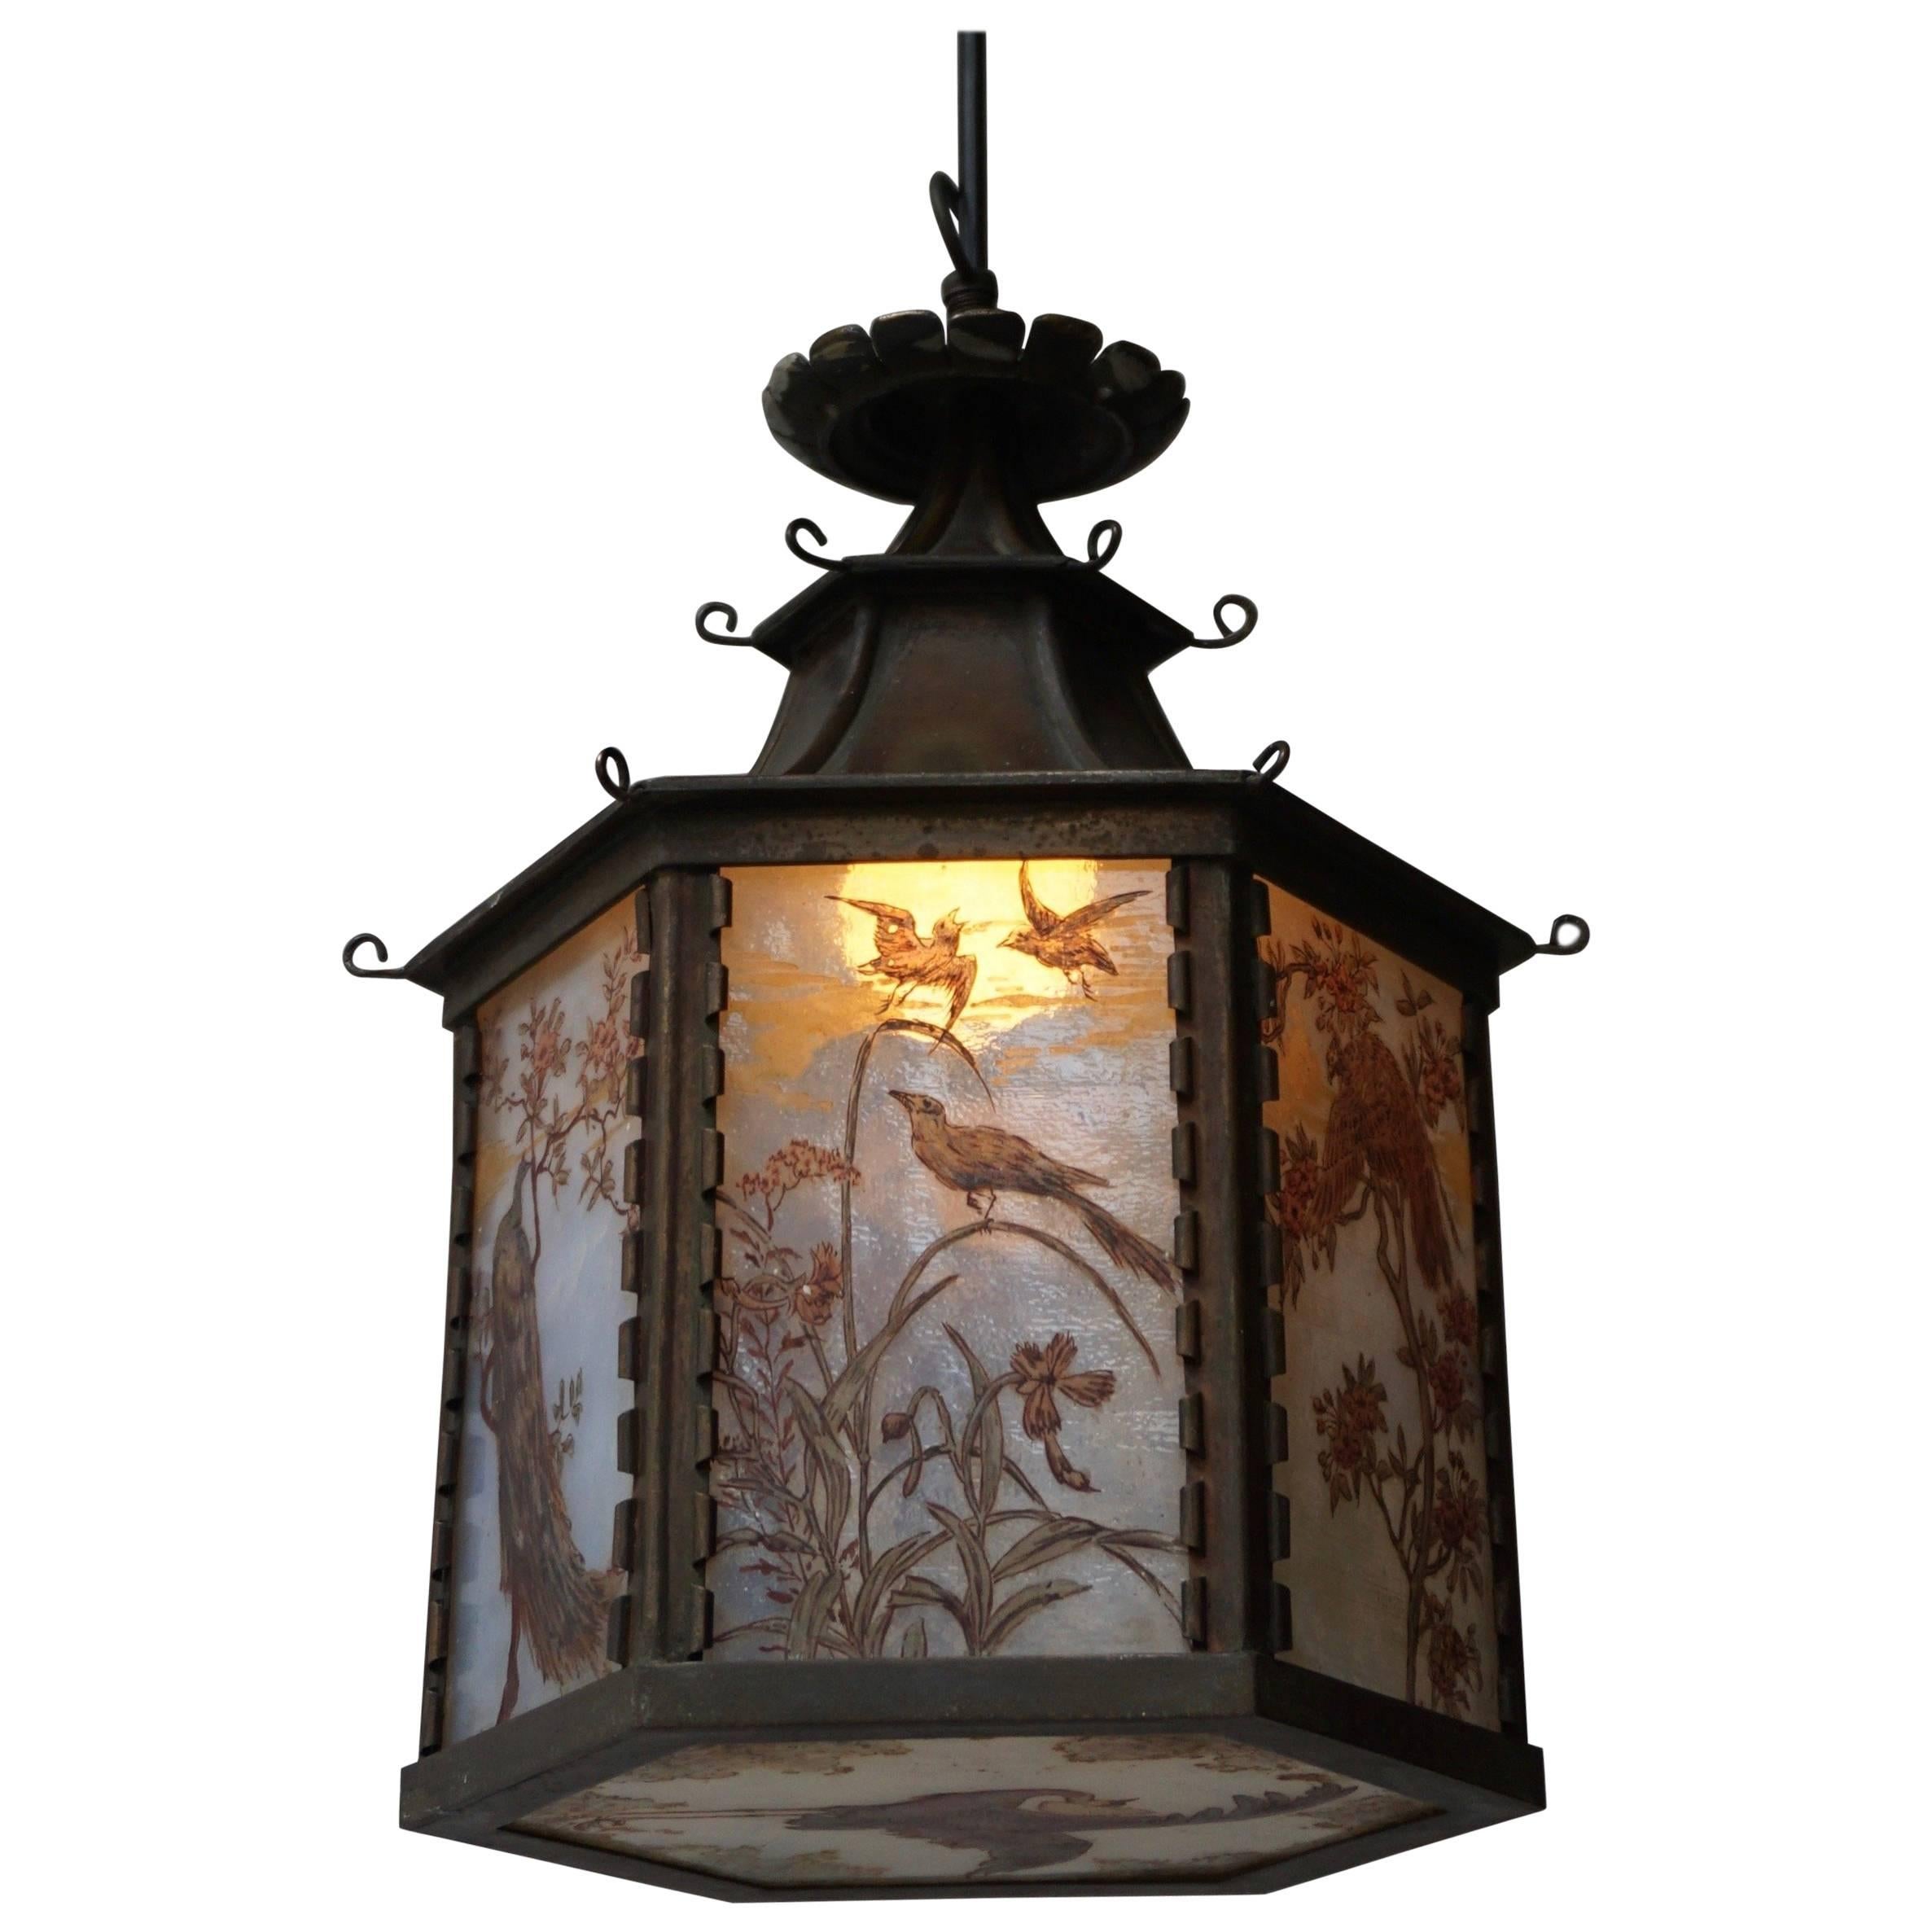 Paint Decorated and Stained Glass Lantern